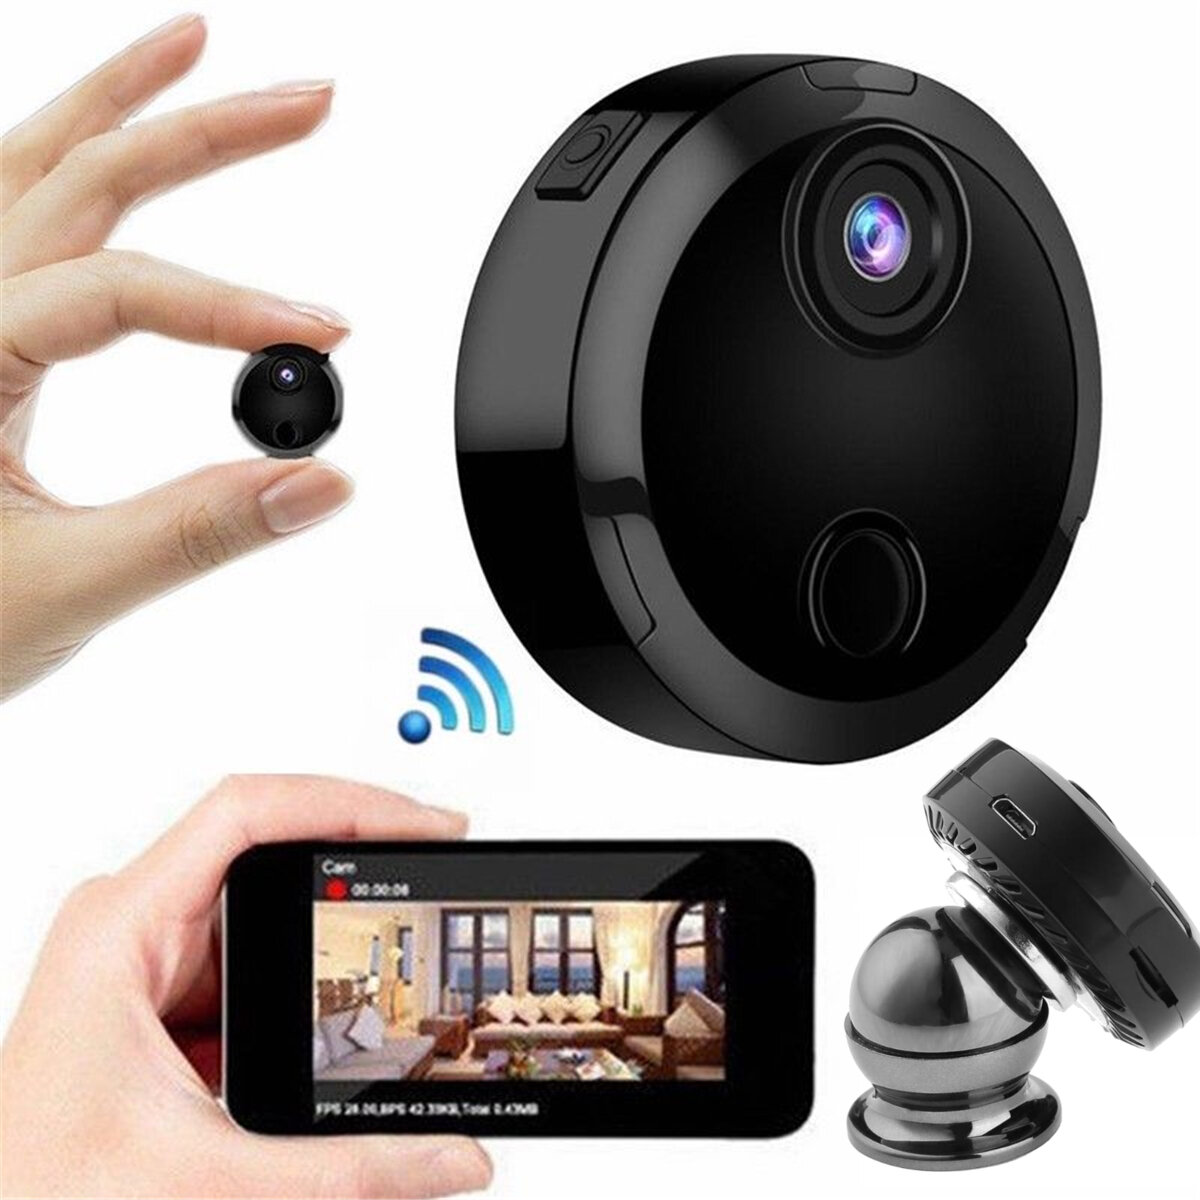 Wireless camera for home